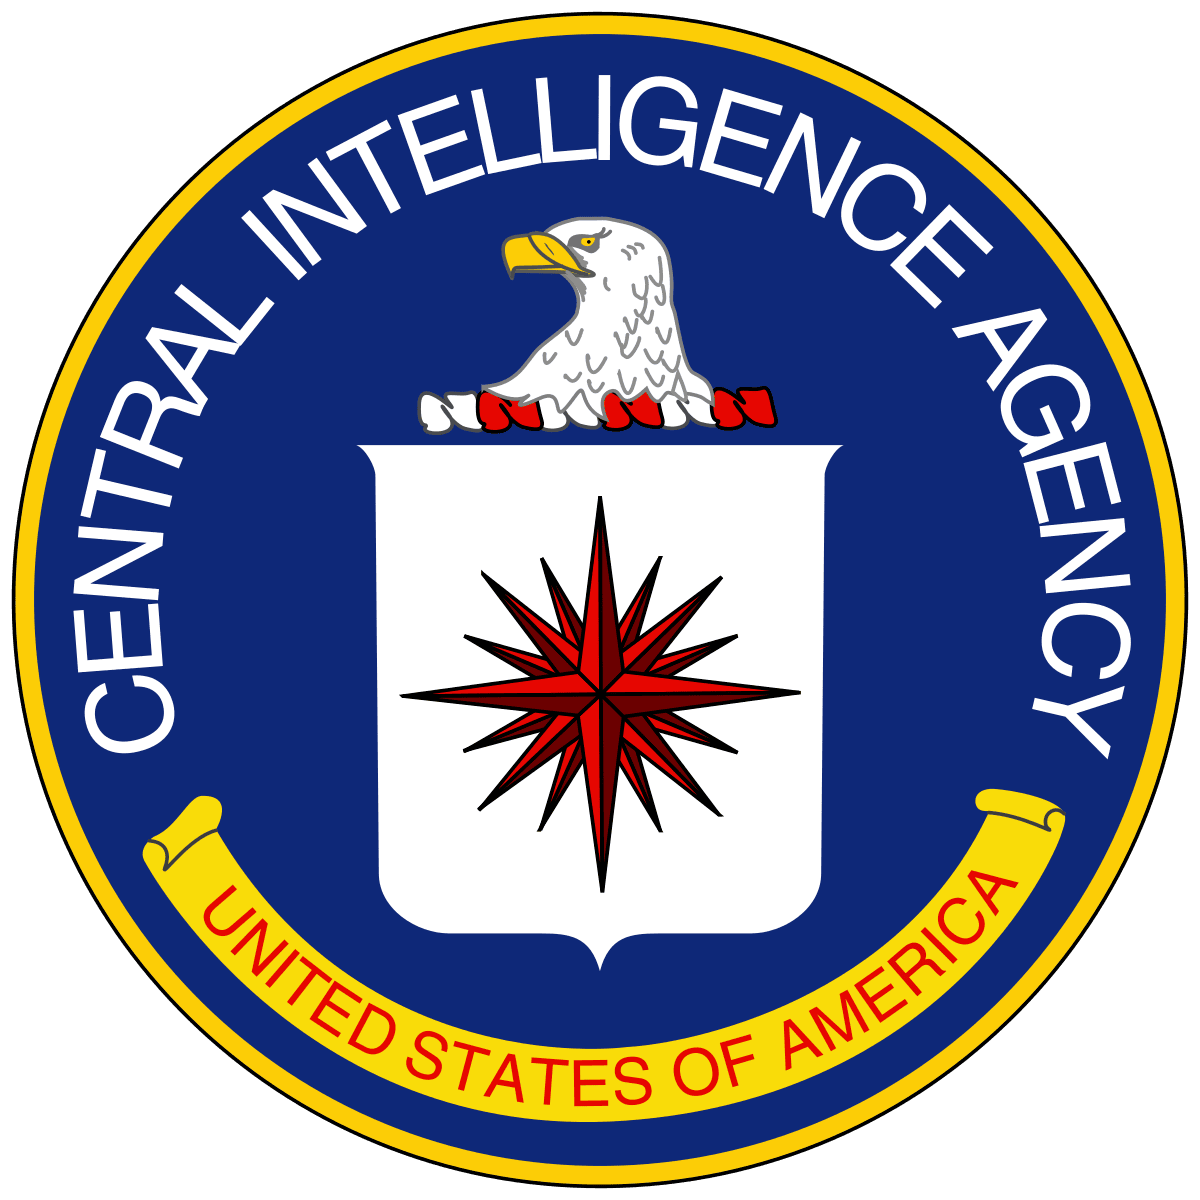 Central_Intelligence_Agency.png